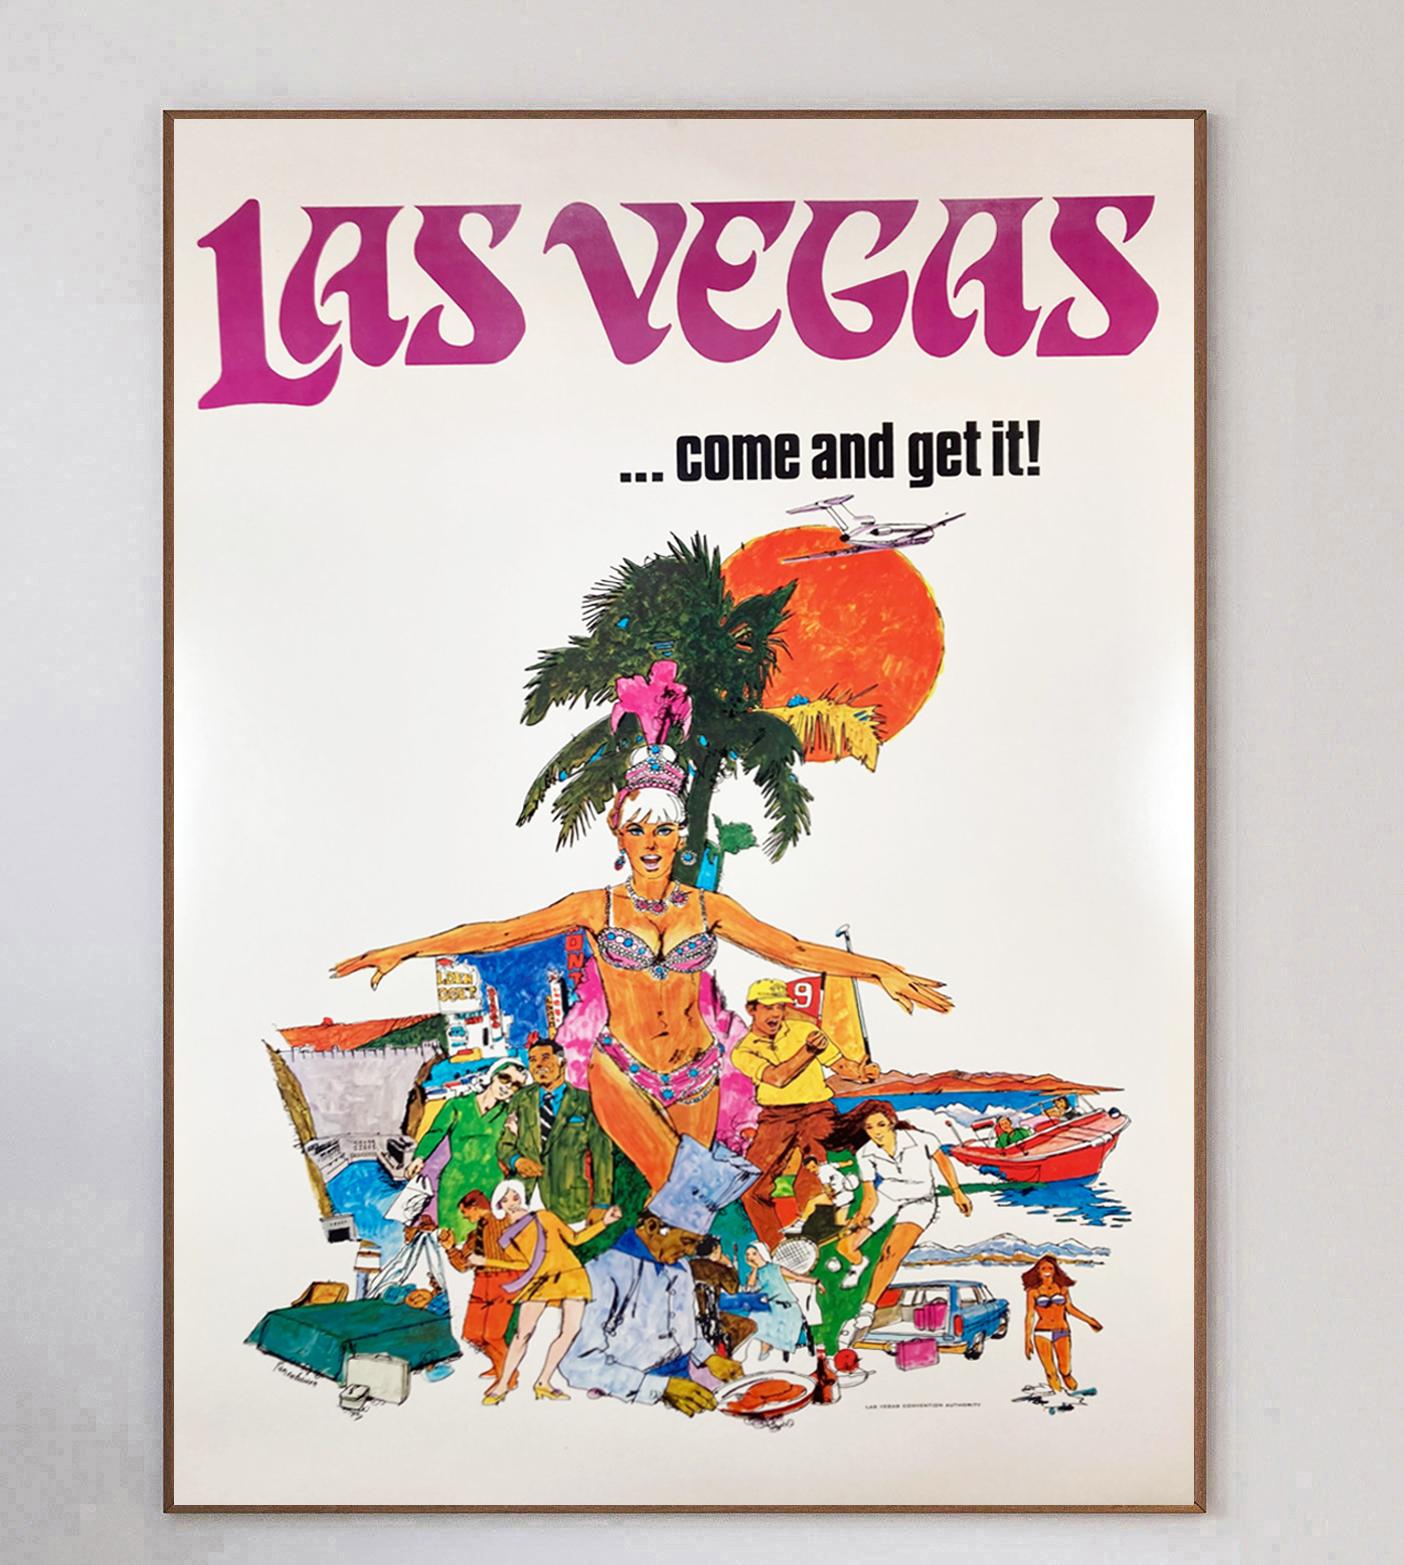 With phenomenal artwork from artist Robert Tannenbaum depicting just some of the things you can enjoy in Las Vegas including dancing, dining and sports activities, this stunning and rare poster from 1970 promotes the Nevada city of Las Vegas for